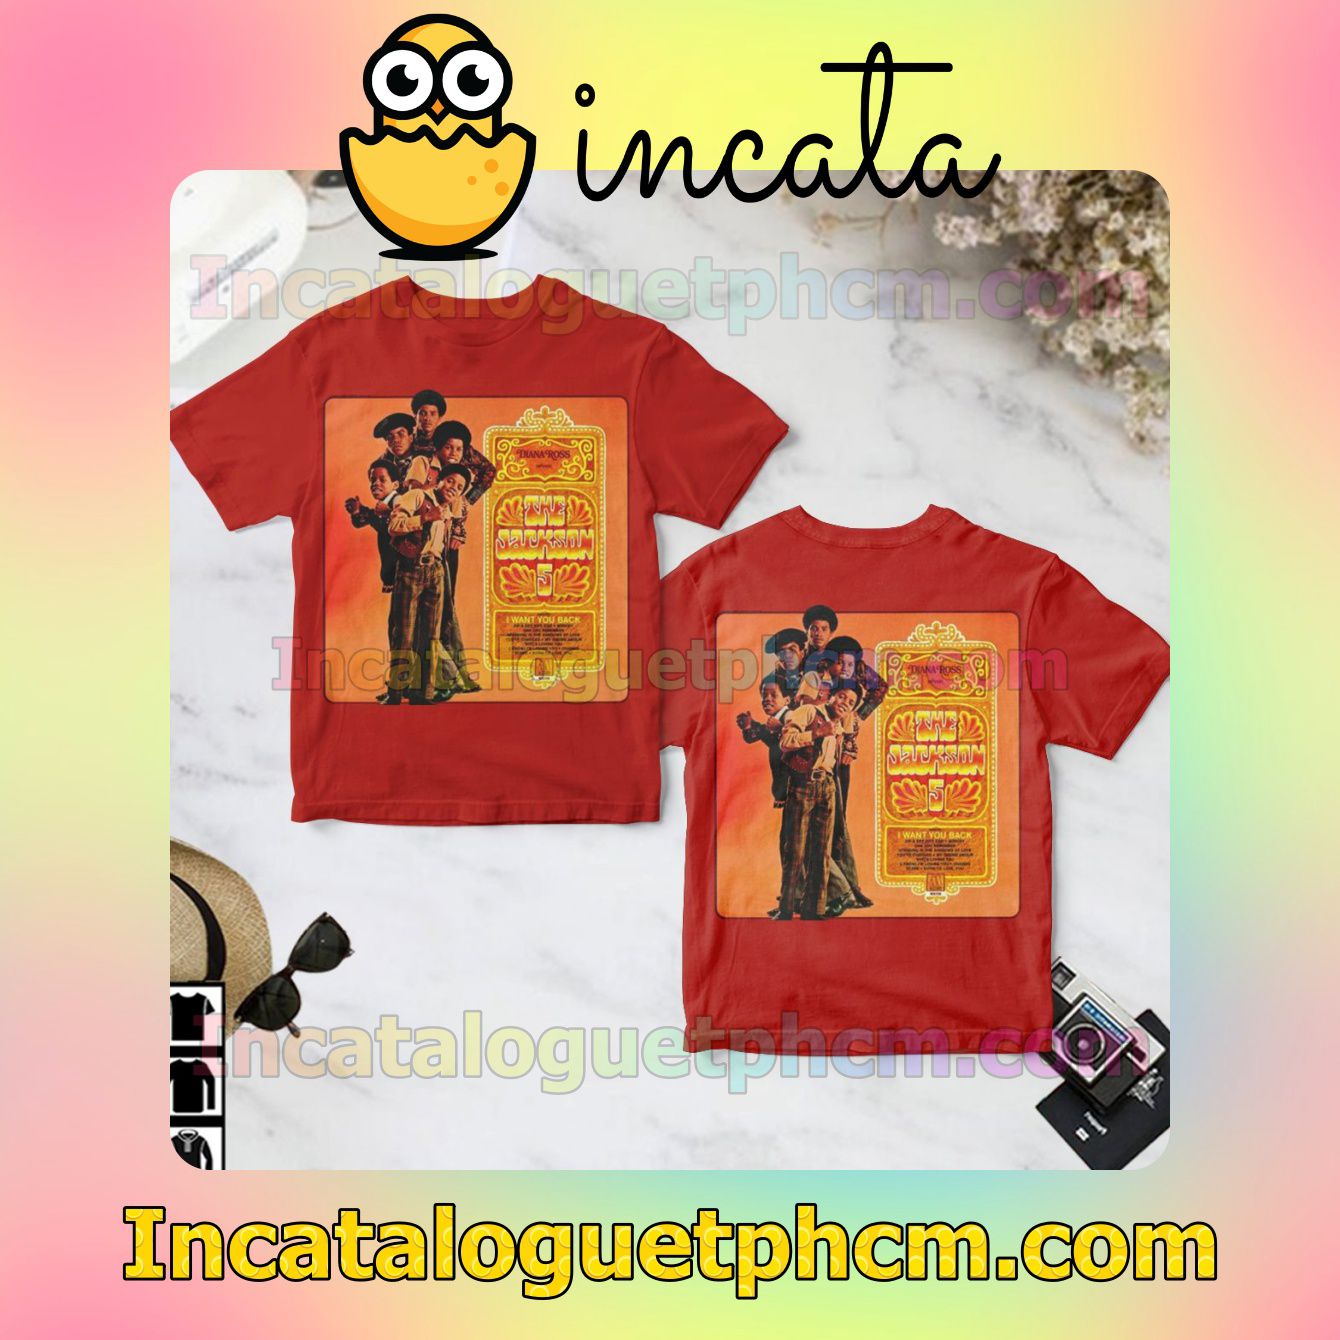 Diana Ross Presents The Jackson 5 Album Cover Red Gift Shirt